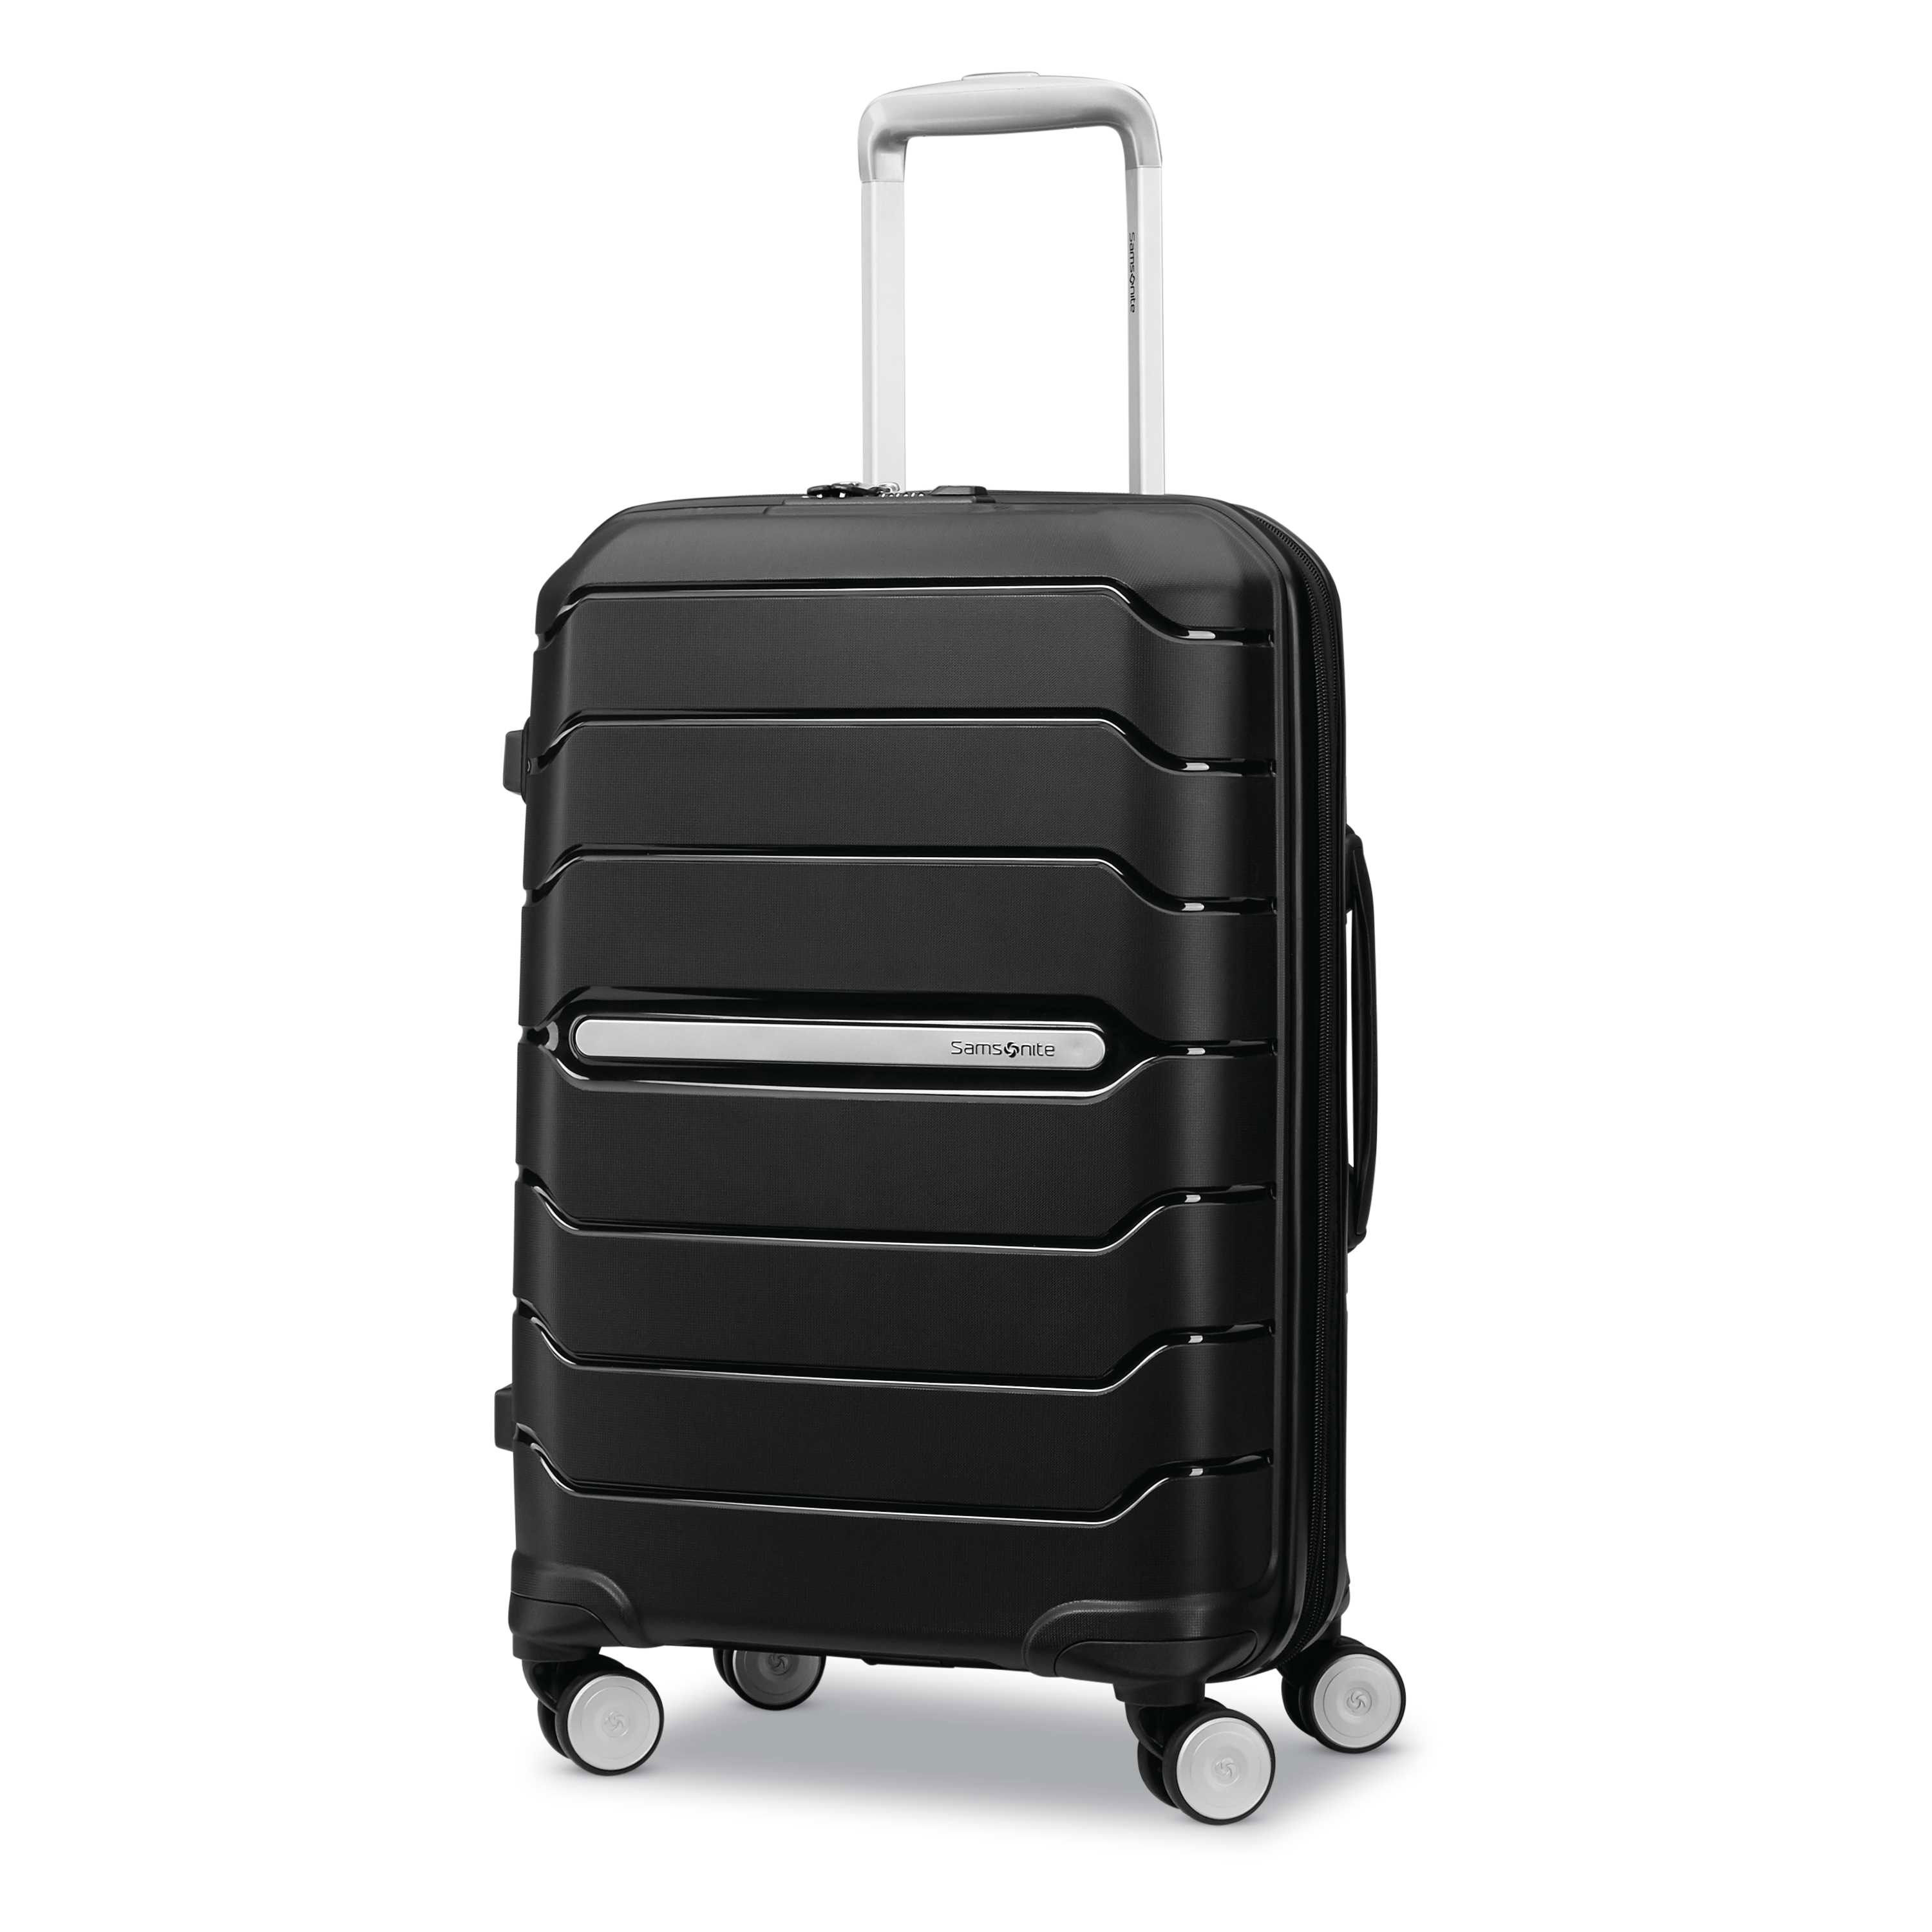 Shop The Large suitcase | Away: Built for modern travel